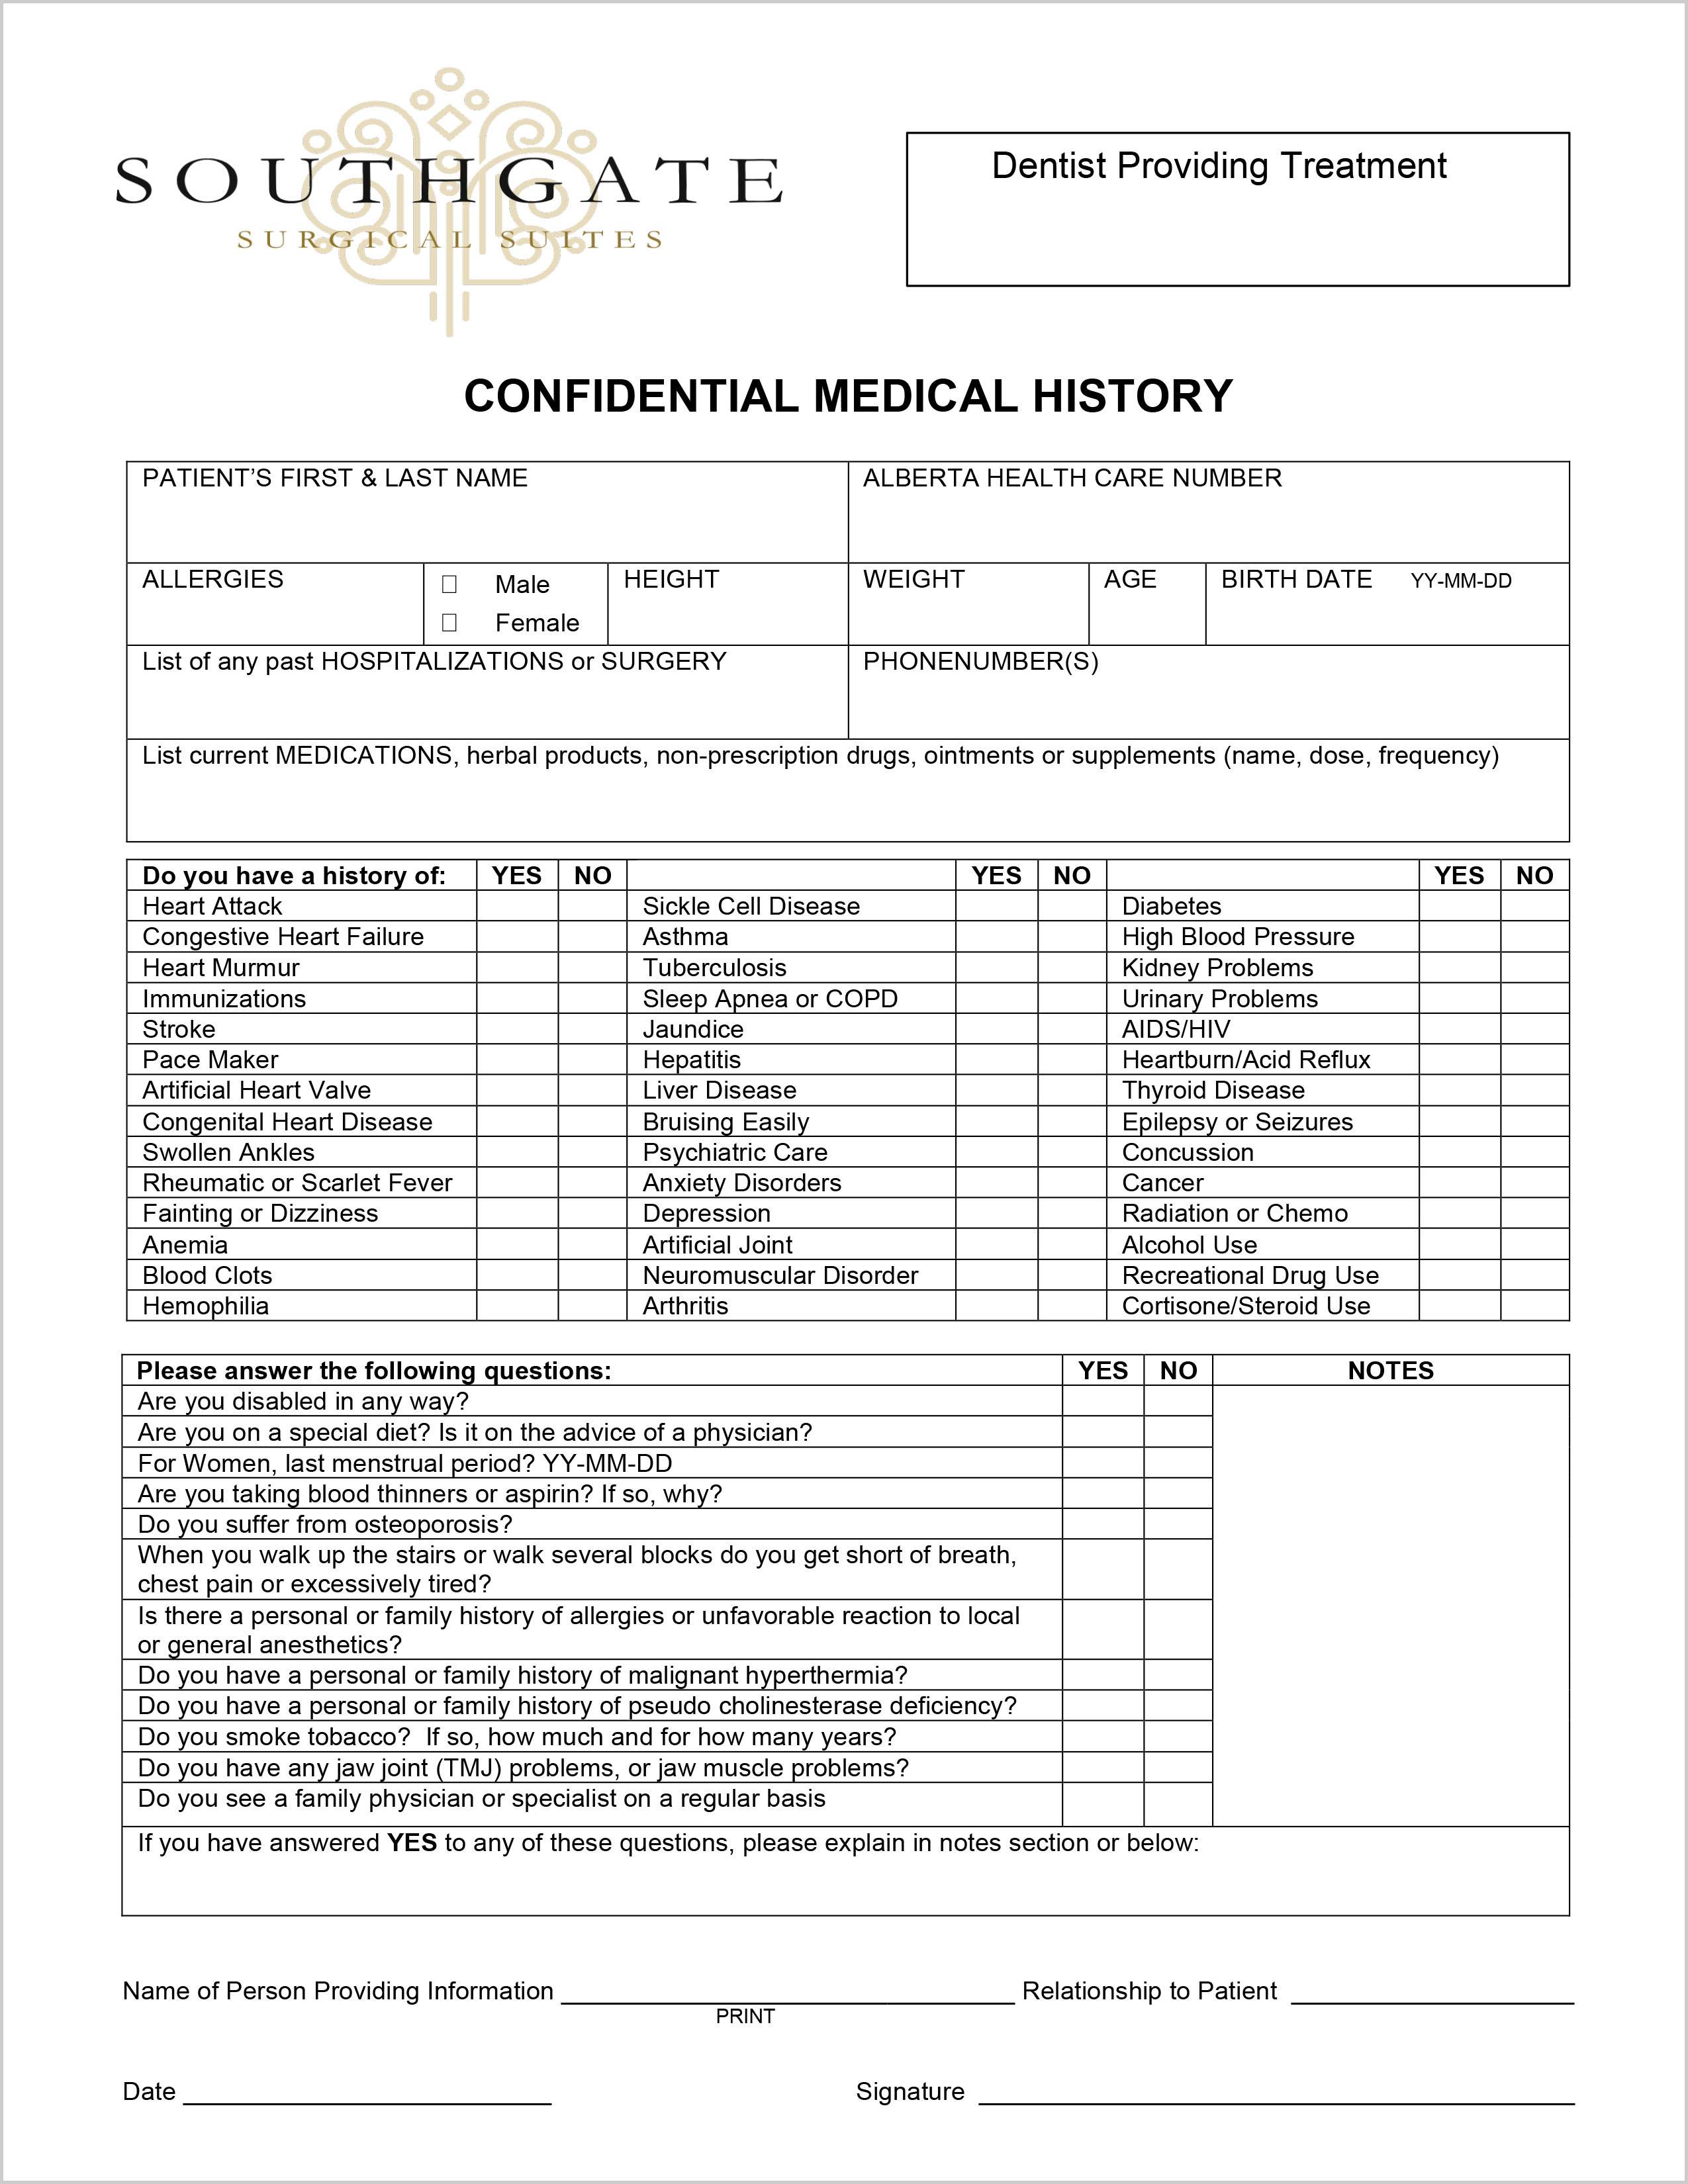 Confidential Medical History Form | Southgate Surgical Suites